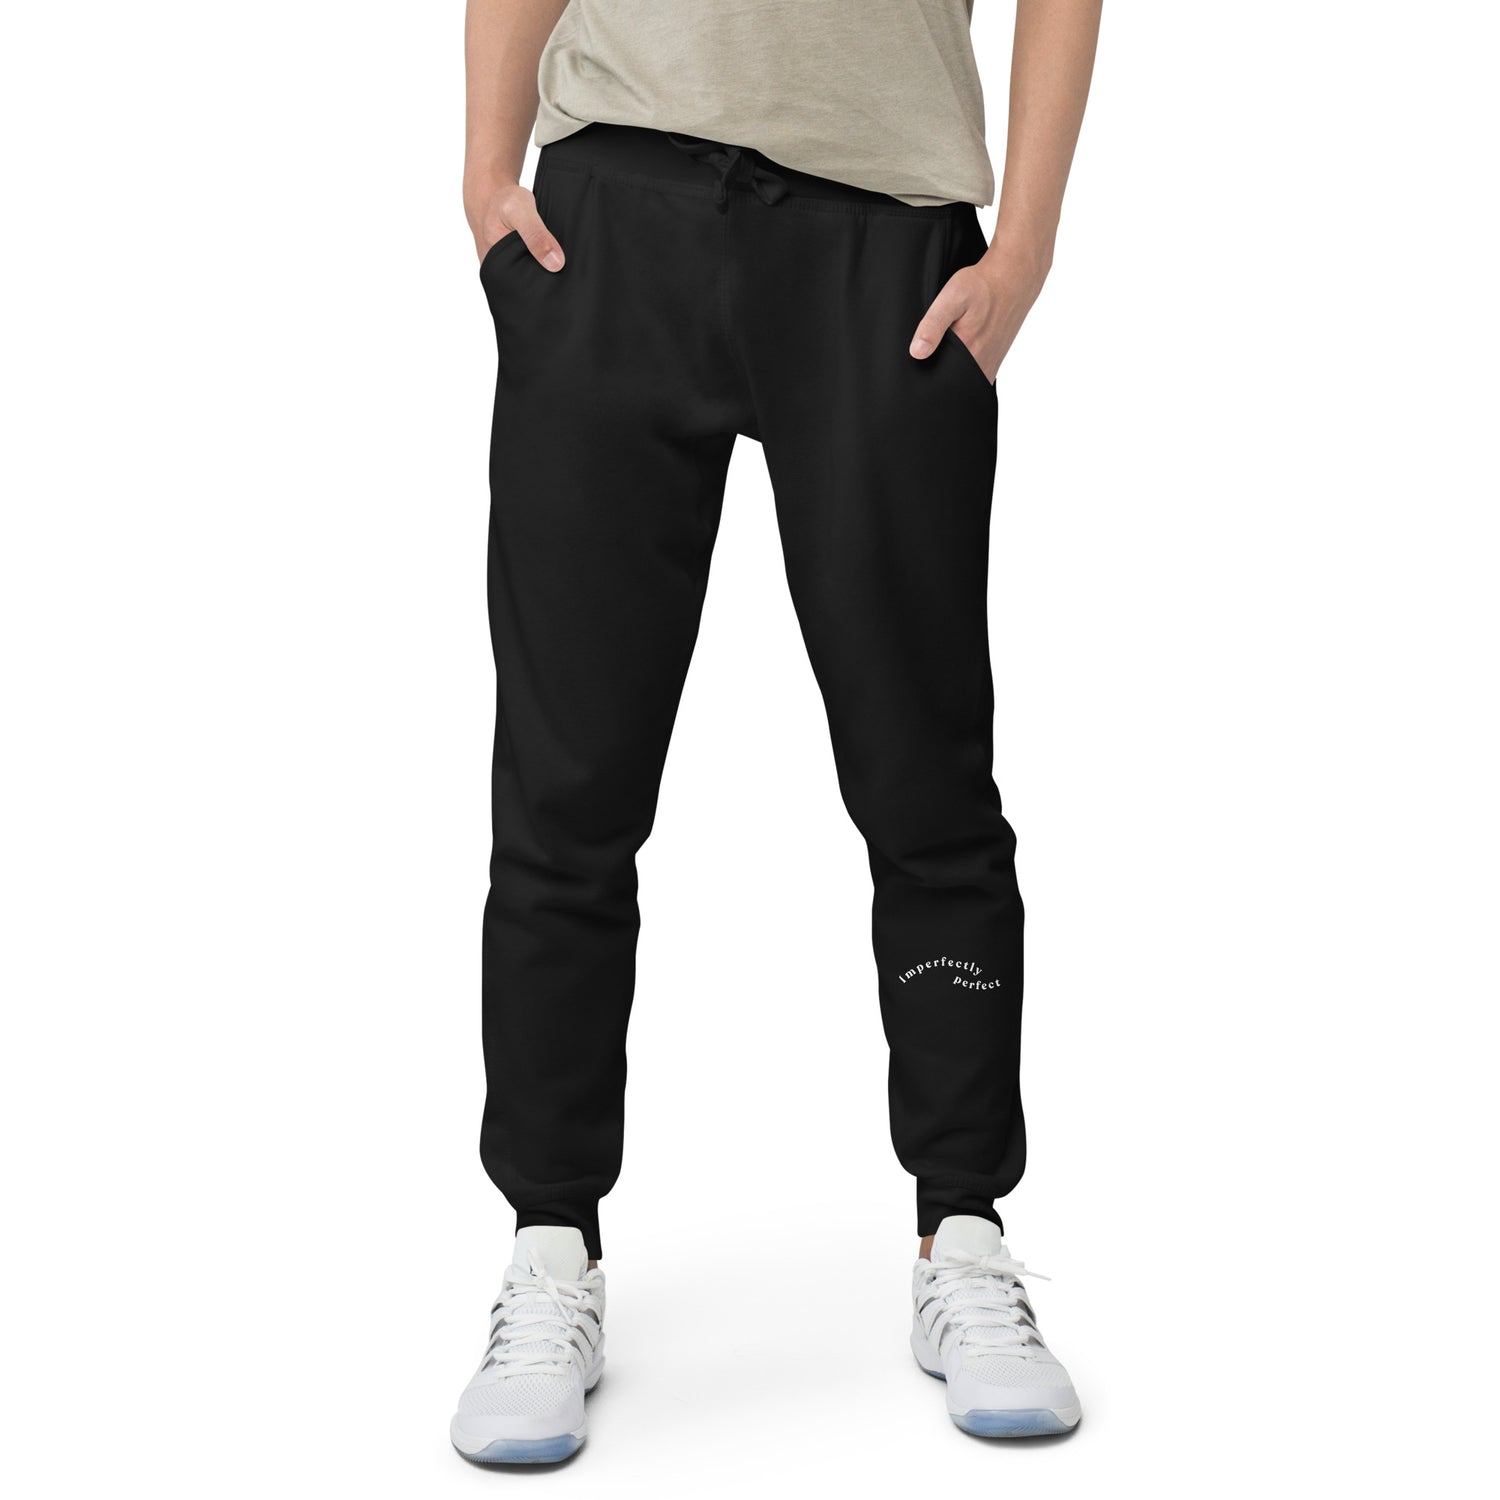 Black sweat pant featuring "Imperfectly perfect" printed on left lower leg.